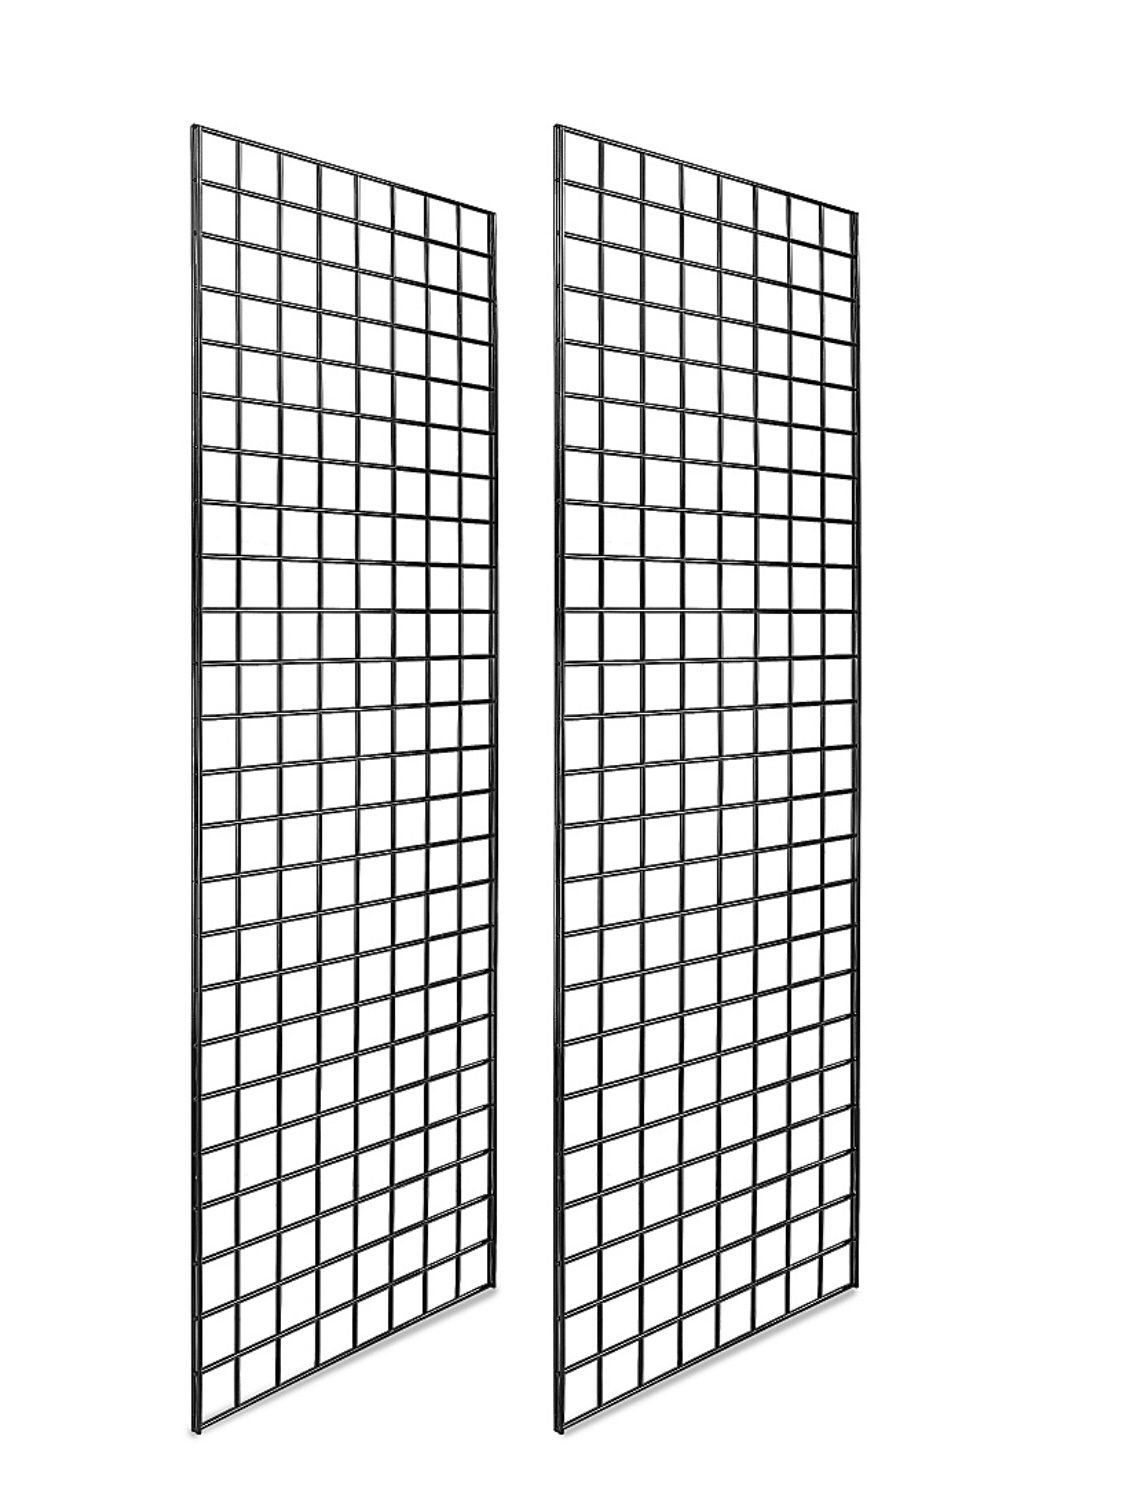 2x6 , 2x4 Grid wall + stand